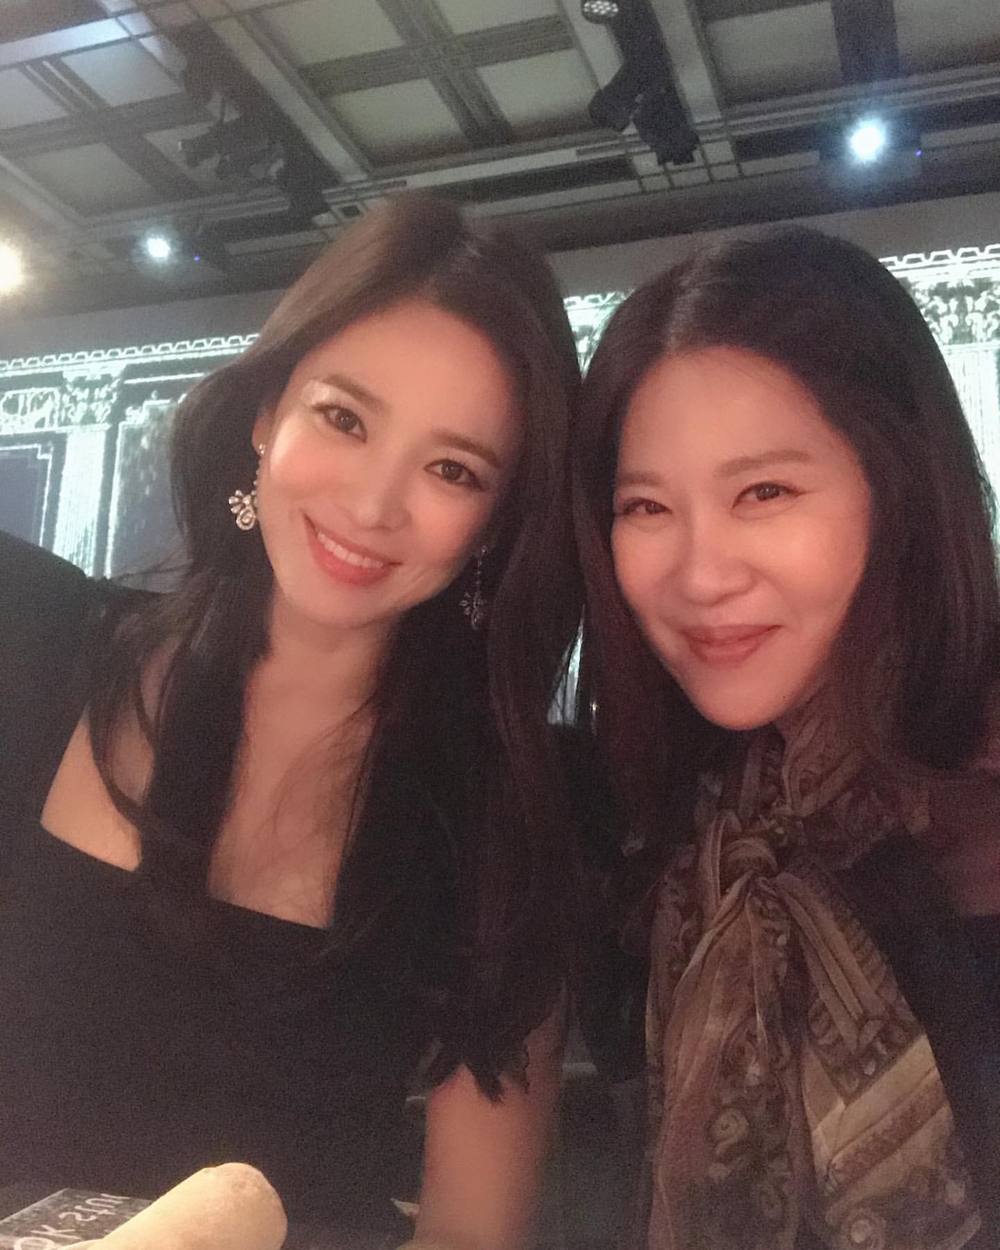 <p>Song Hye-kyo the most elegant, Beautiful looks for the show had.</p><p>W eBay this wisdom very Editor 10 18, his Instagram, or met I us the phraseand the US said.</p><p>Photo belongs to Song Hye-kyo is wearing a black dress full of laughter. He Smokey makeup on the beautiful visuals boasted.</p><p>This vase is the photo upload thank you, Beautiful looks with a playful not. such as take.</p>